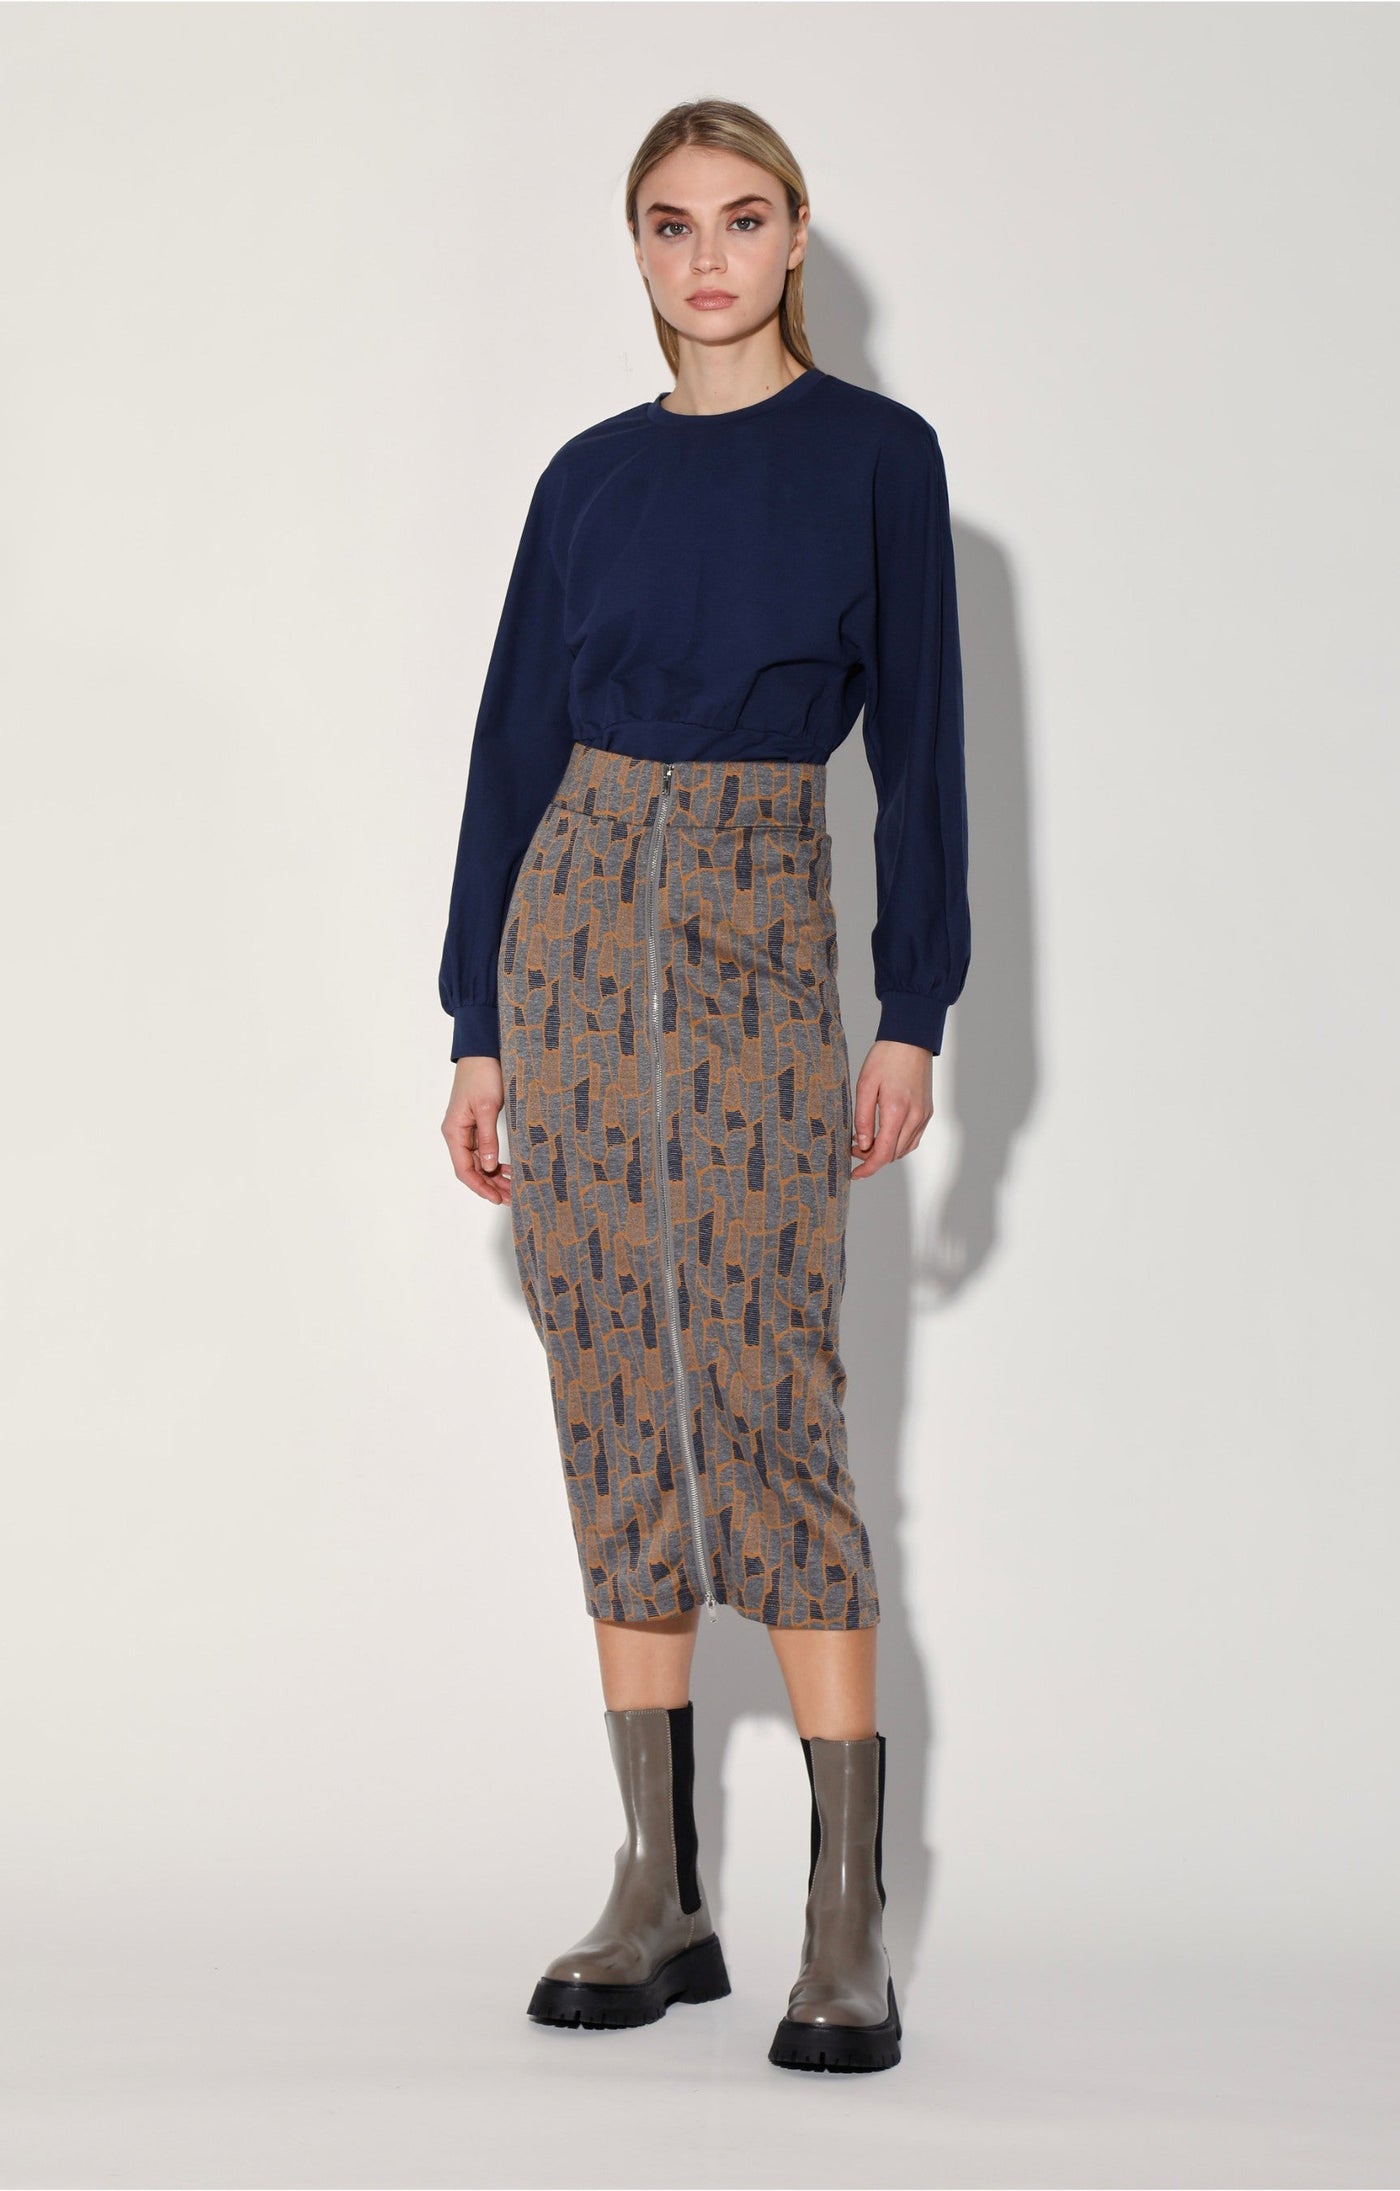 Ruthie Skirt, Grey Tan by Walter Baker